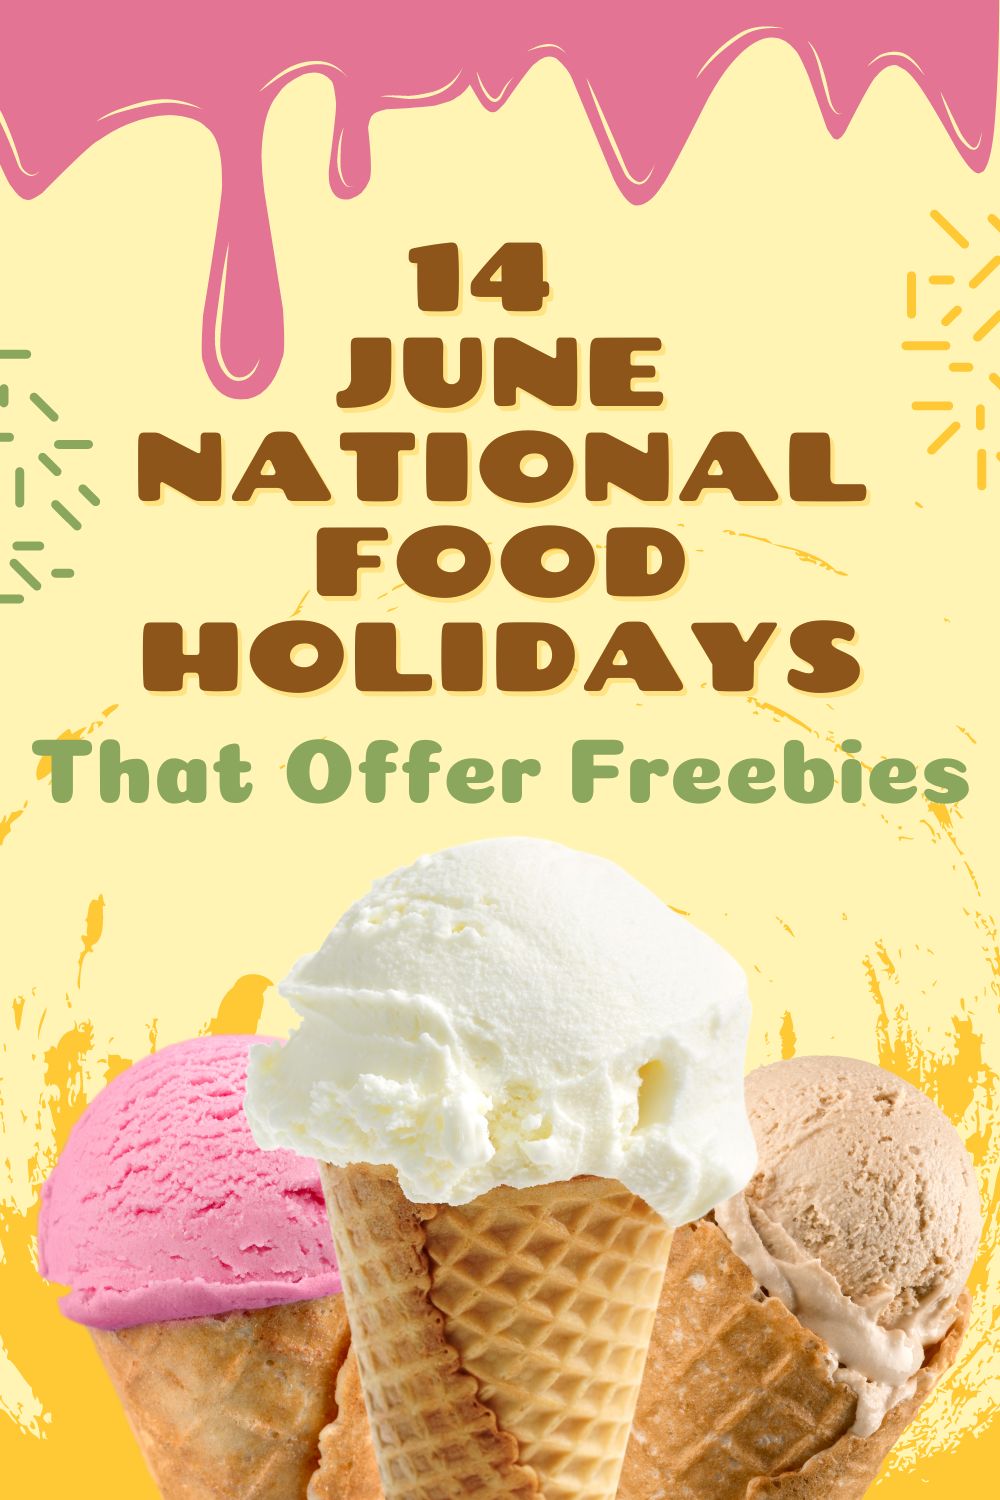 14 June National Food Holidays That Offer Freebies